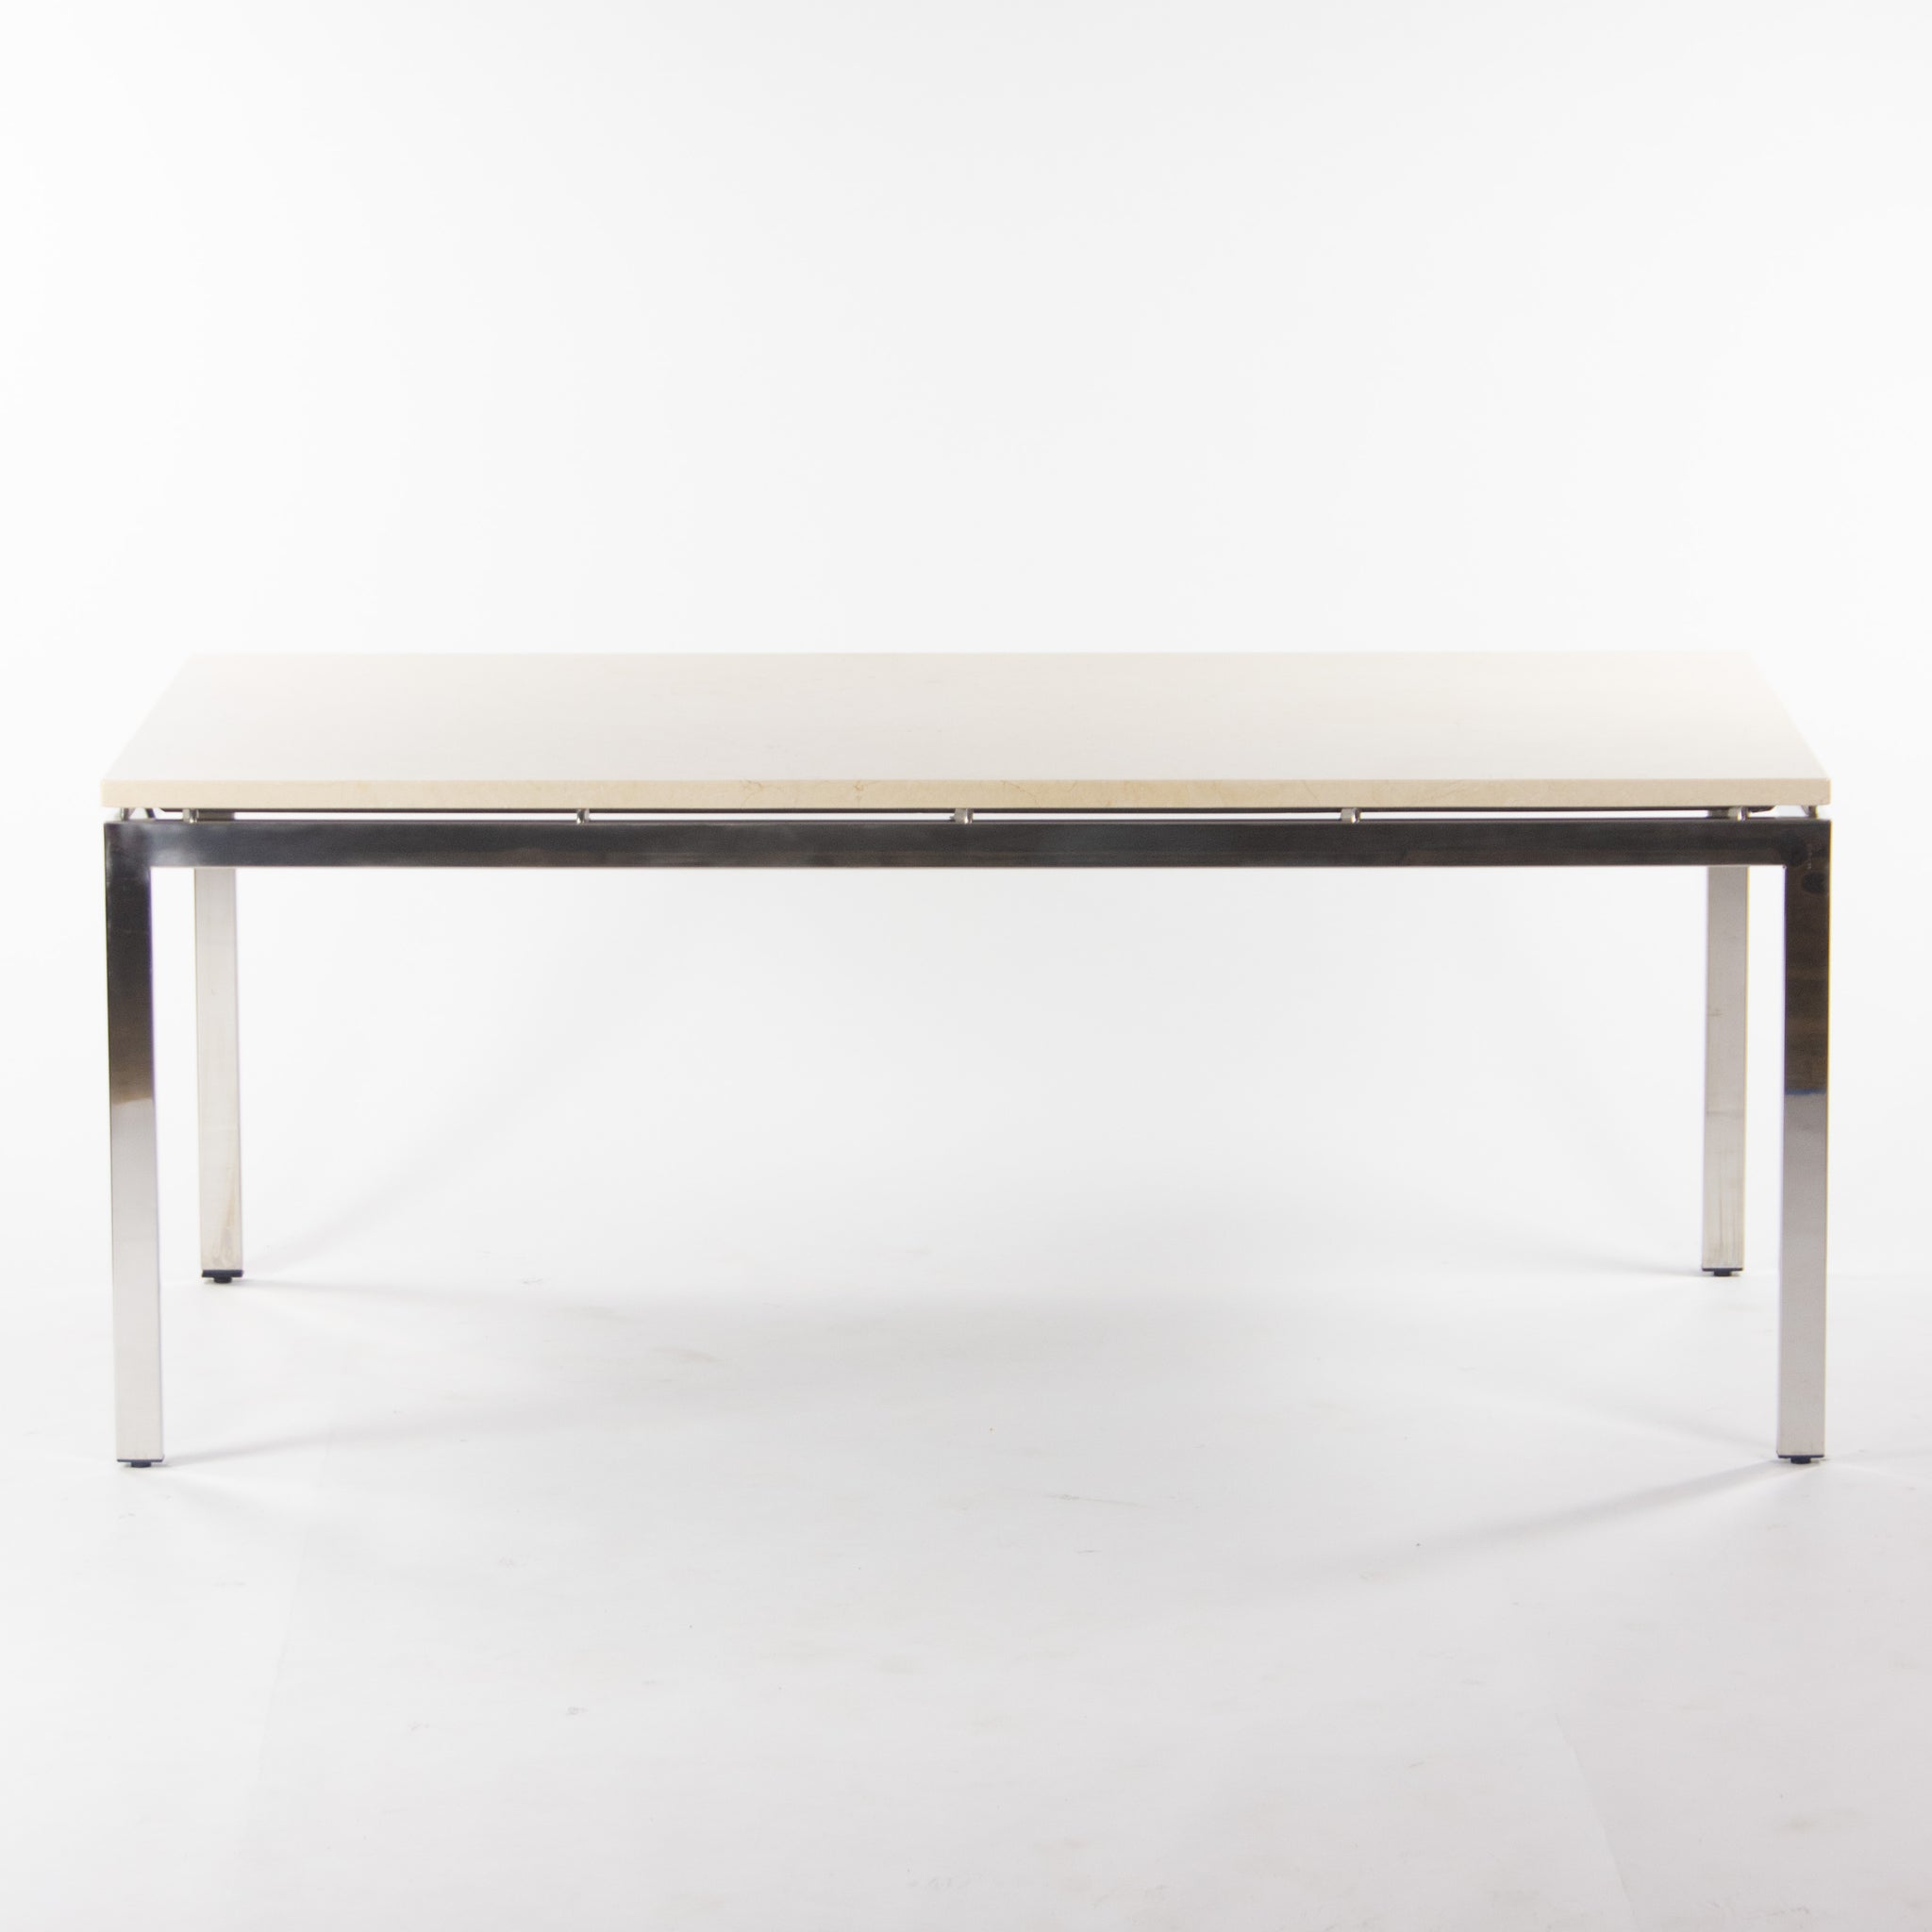 Granite Cumberland 6x3 Meeting Dining Conference Table Beige w/ Stainless Steel Base